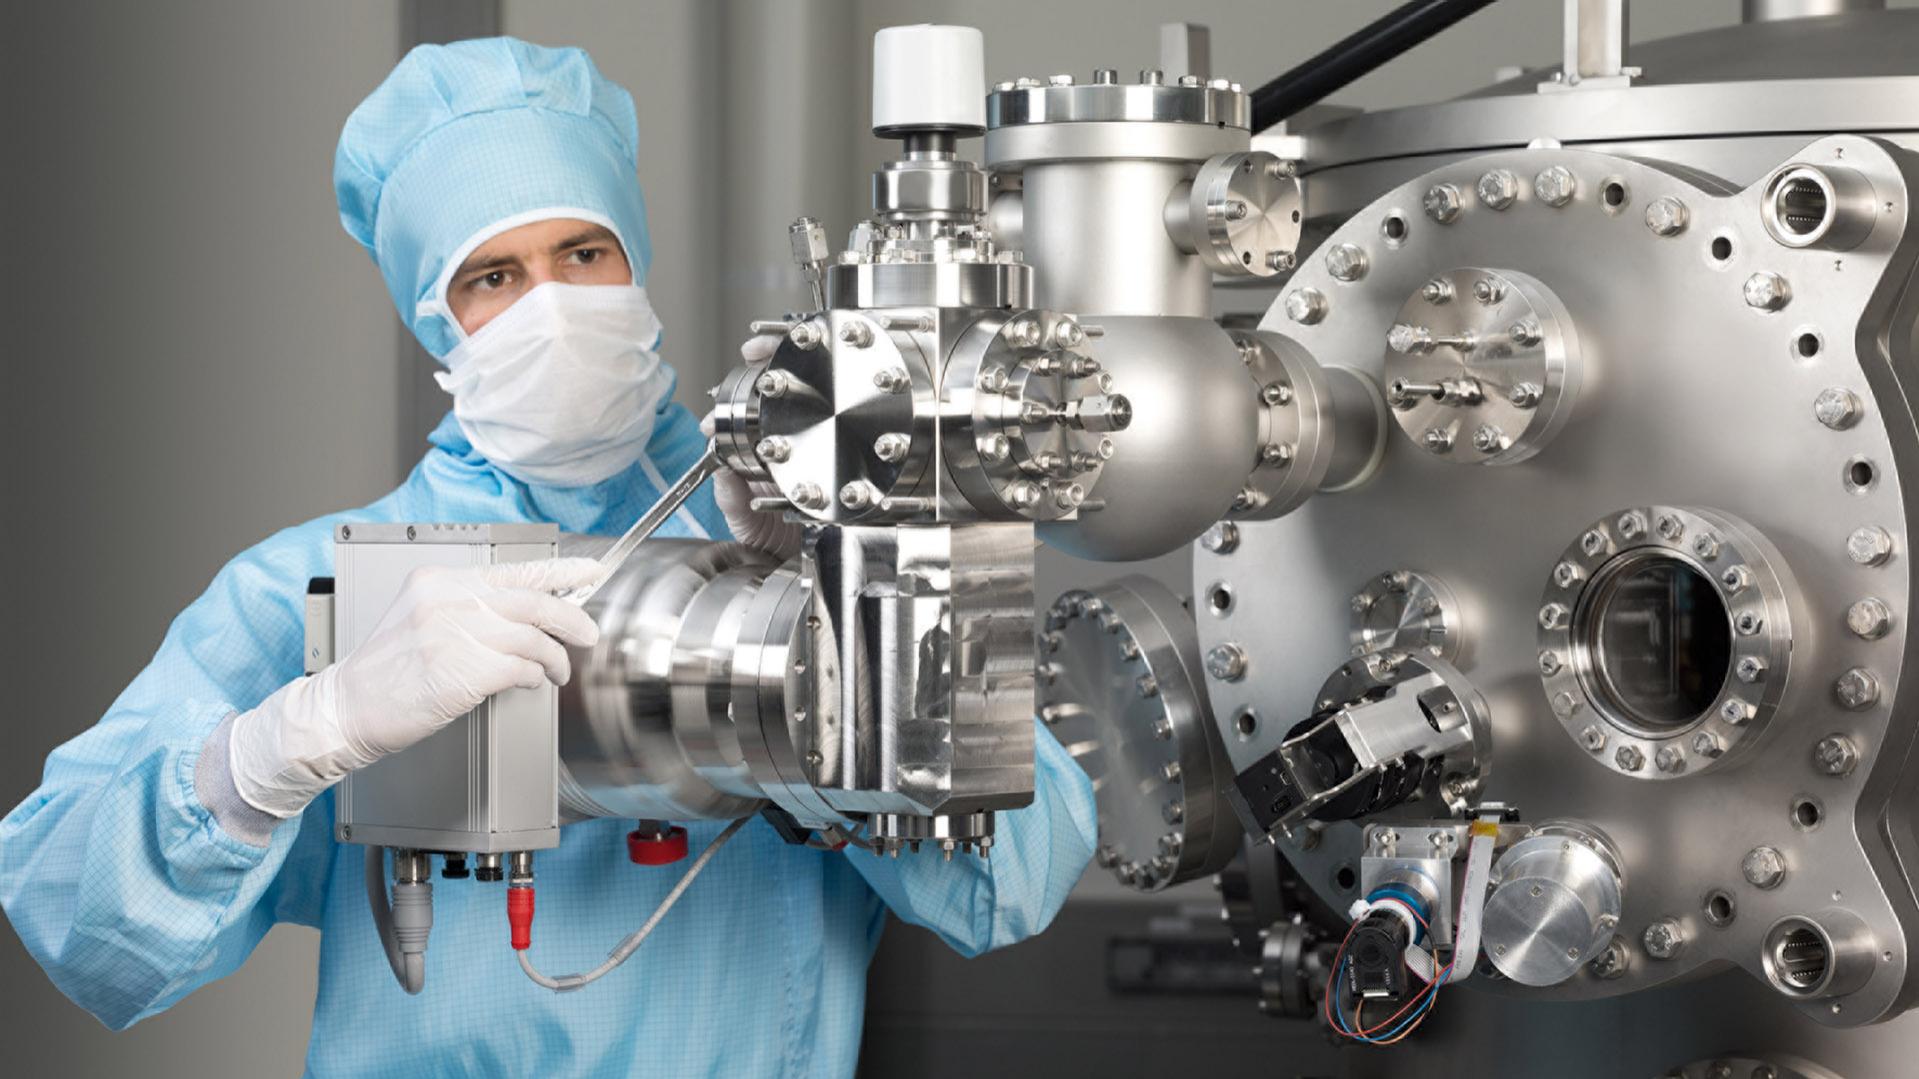 An employee of ZEISS works on the SMT technologies in a cleaning room